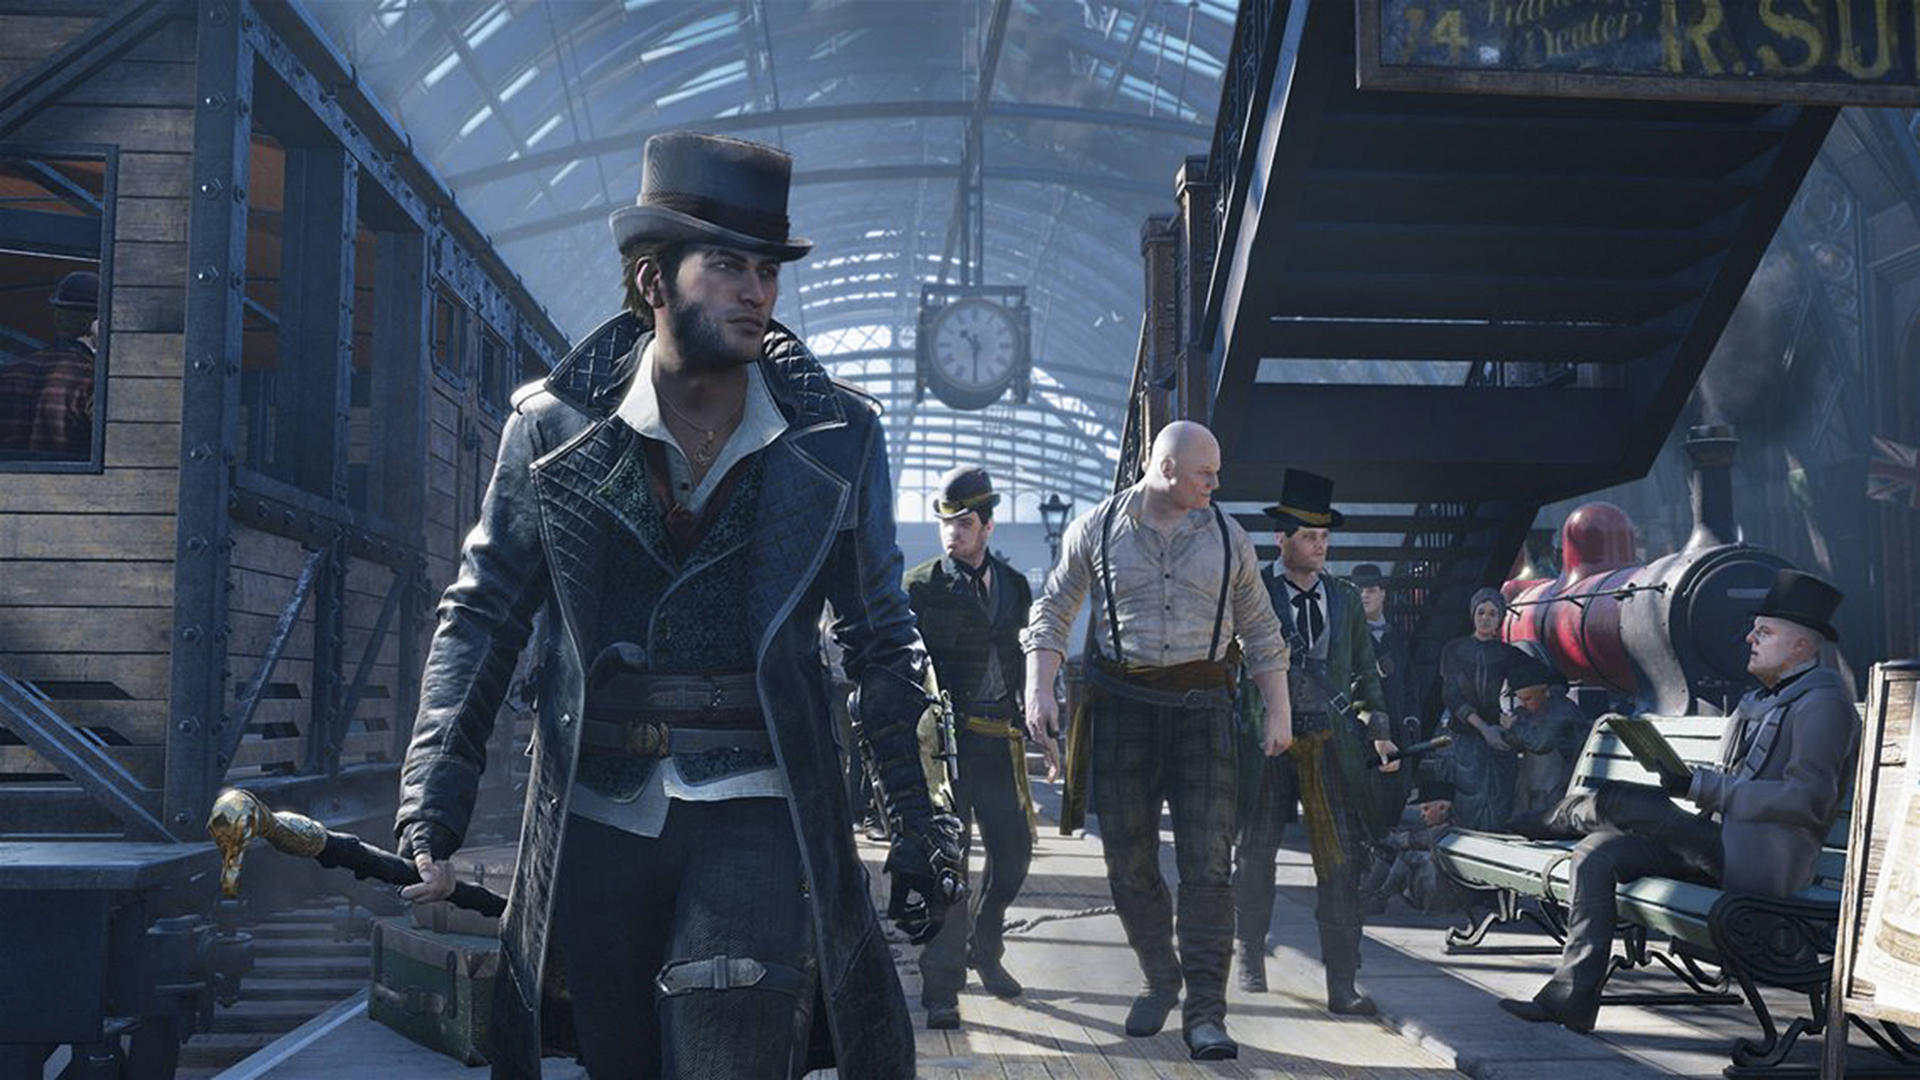 Despite the beautifully rendered Victorian London setting of Assassin's Creed Syndicate, the game suffers from such profound technical problems that it is a chore to play.